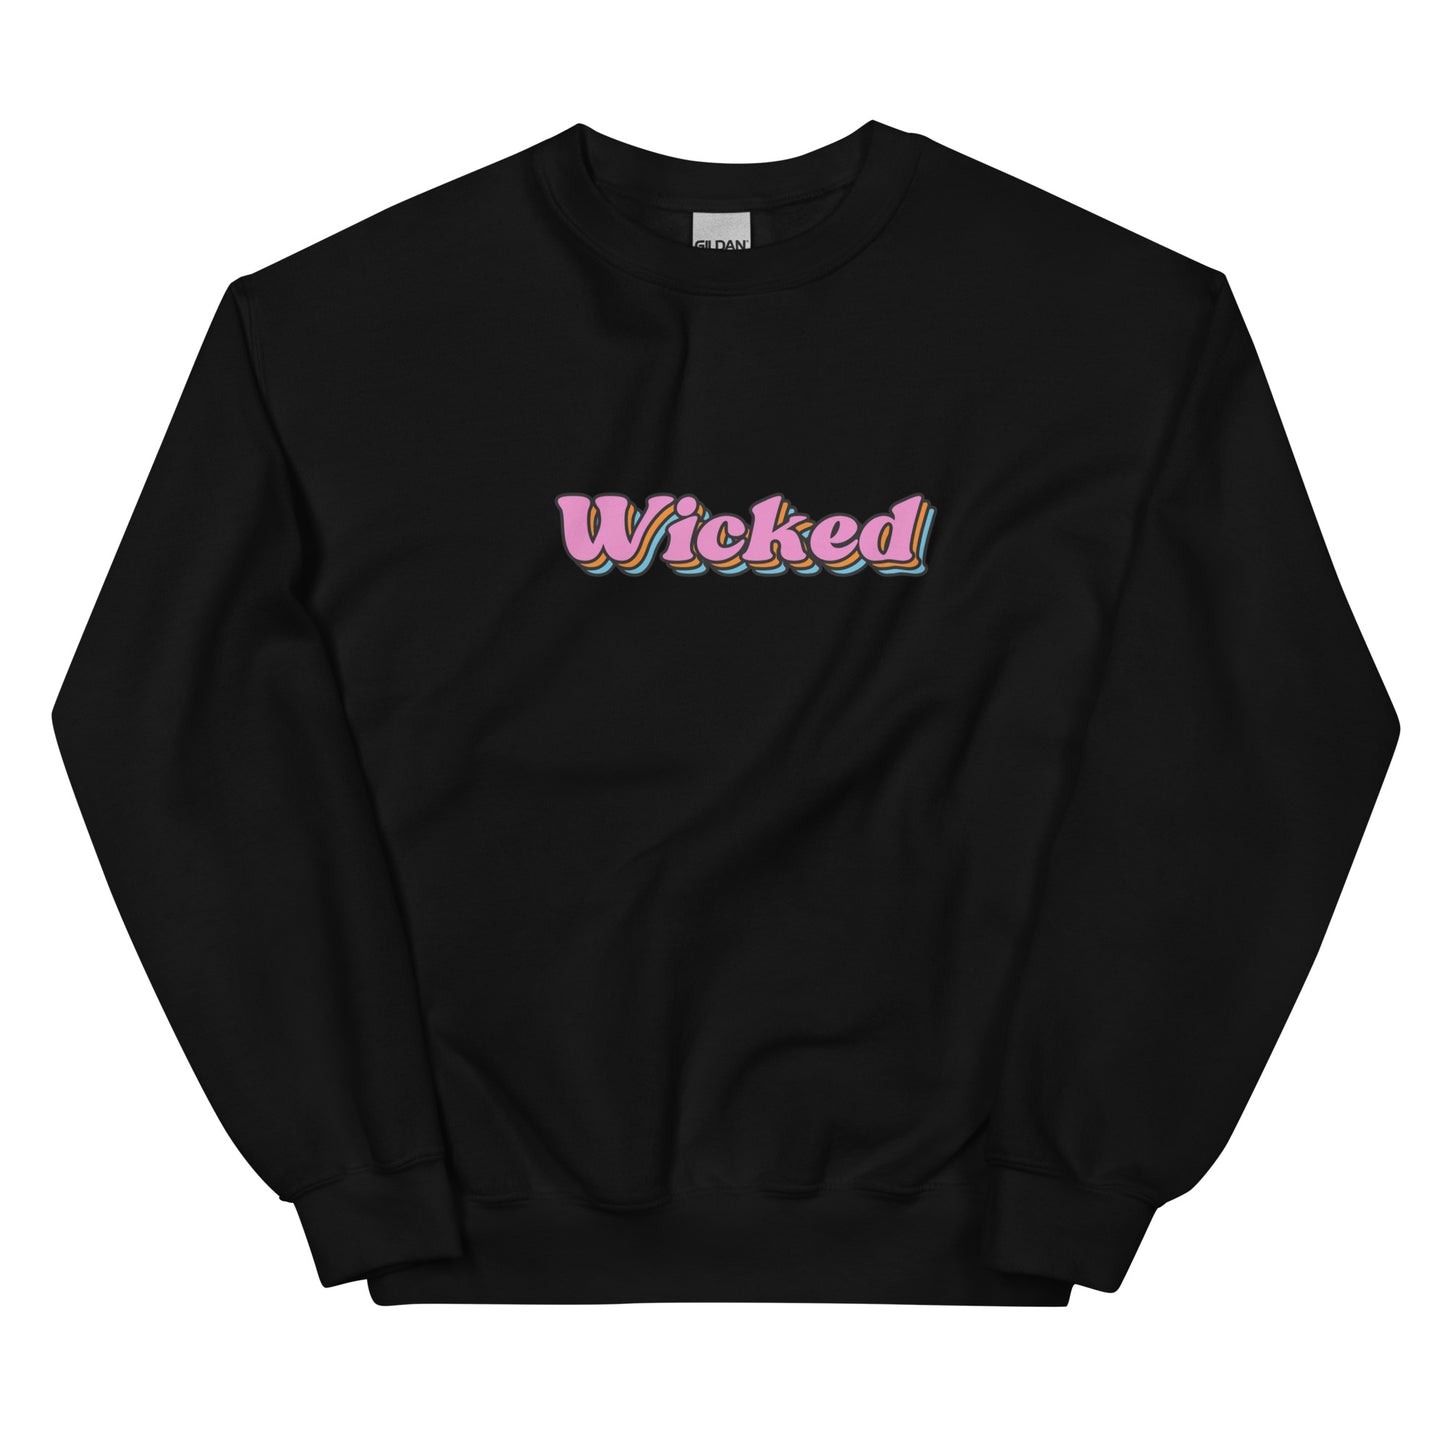 black crewneck that says "wicked" in pink lettering